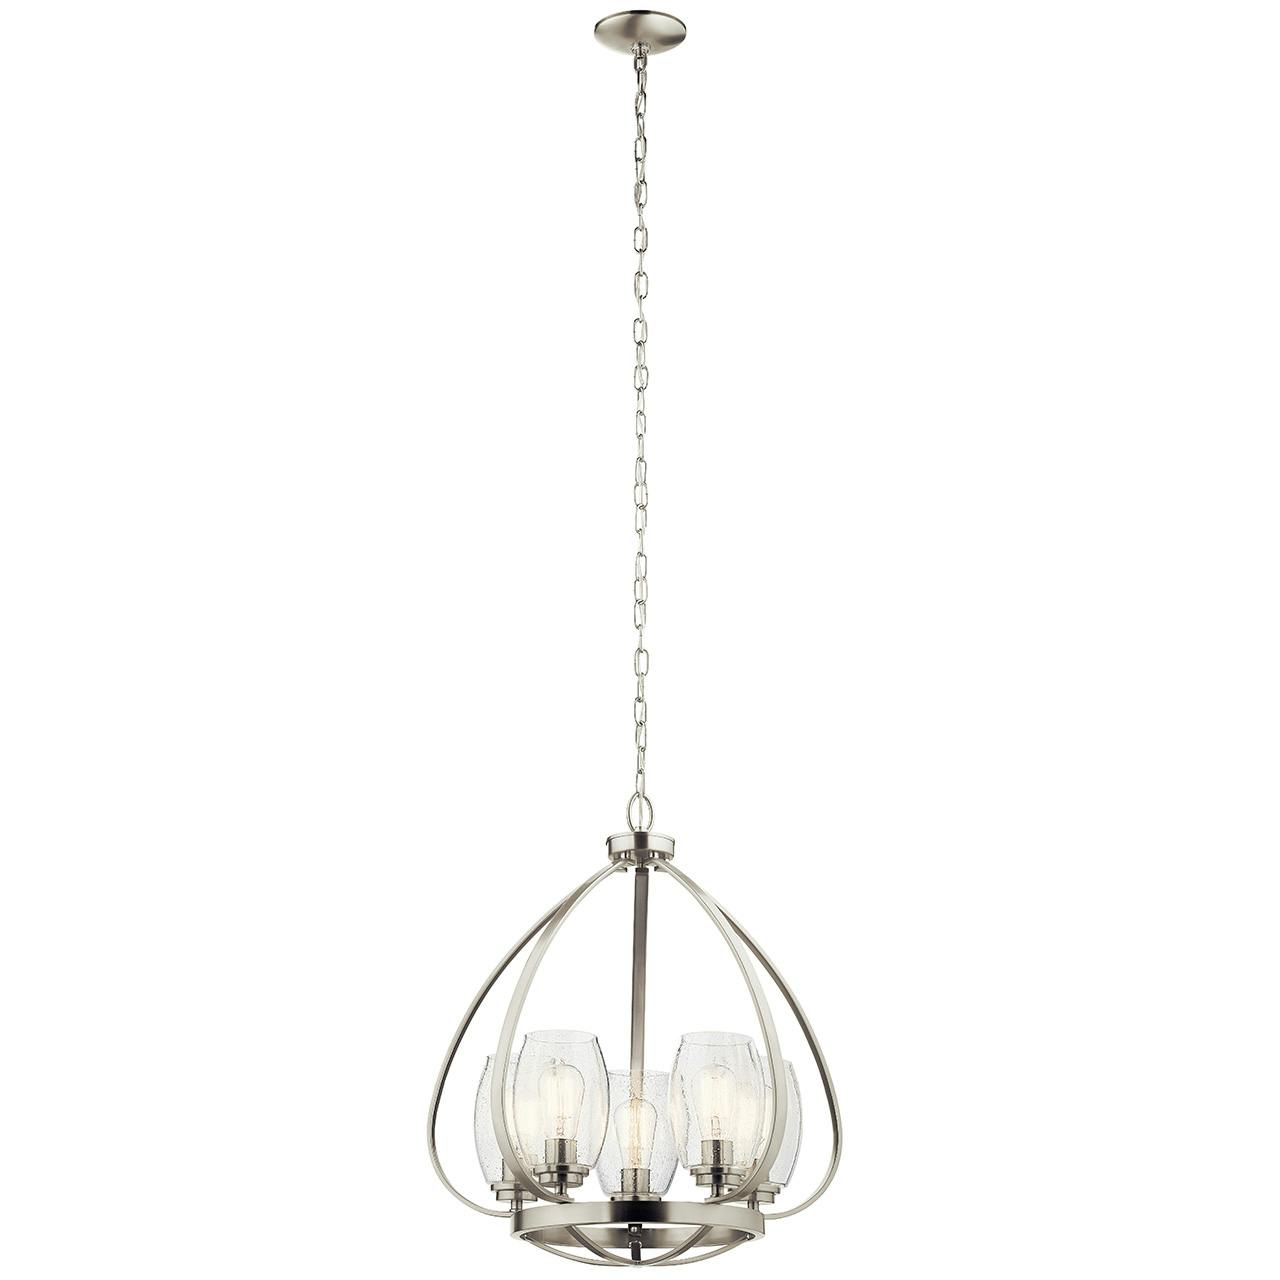 Tuscany 24" 5 Light Chandelier in Nickel on a white background